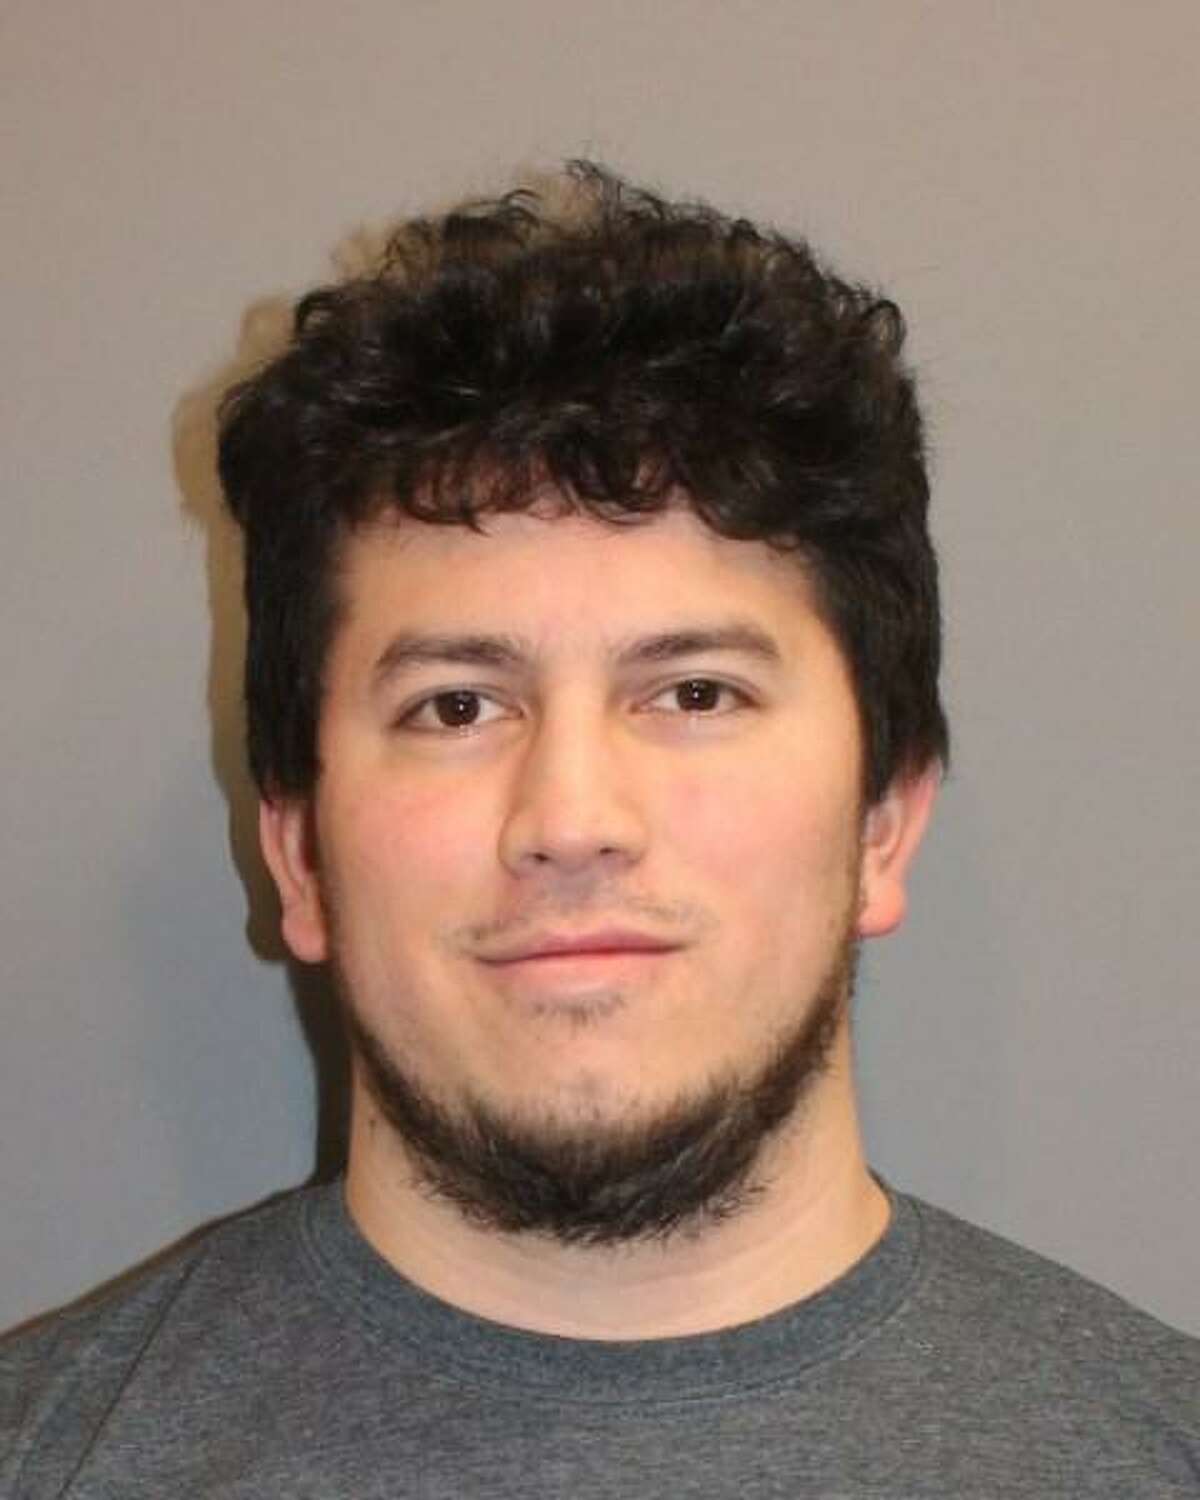 Thom Nikas was arrested by Norwalk police Saturday and charged with sexual assault.